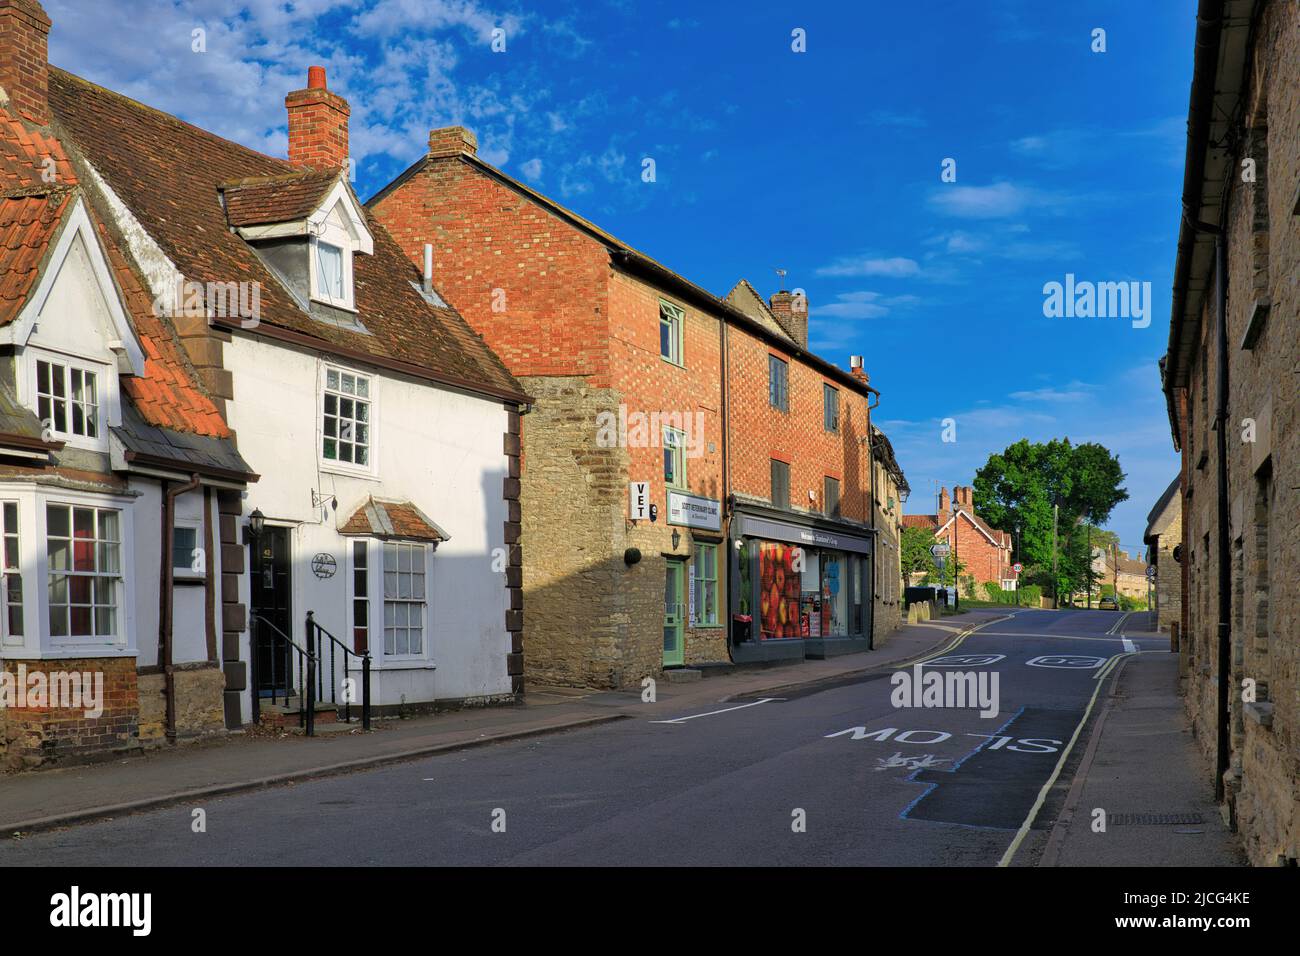 Sharnbrook, Bedfordshire, England, UK - Co-op shop, veterinary clinic and cottages in the village high street on a sunny morning Stock Photo